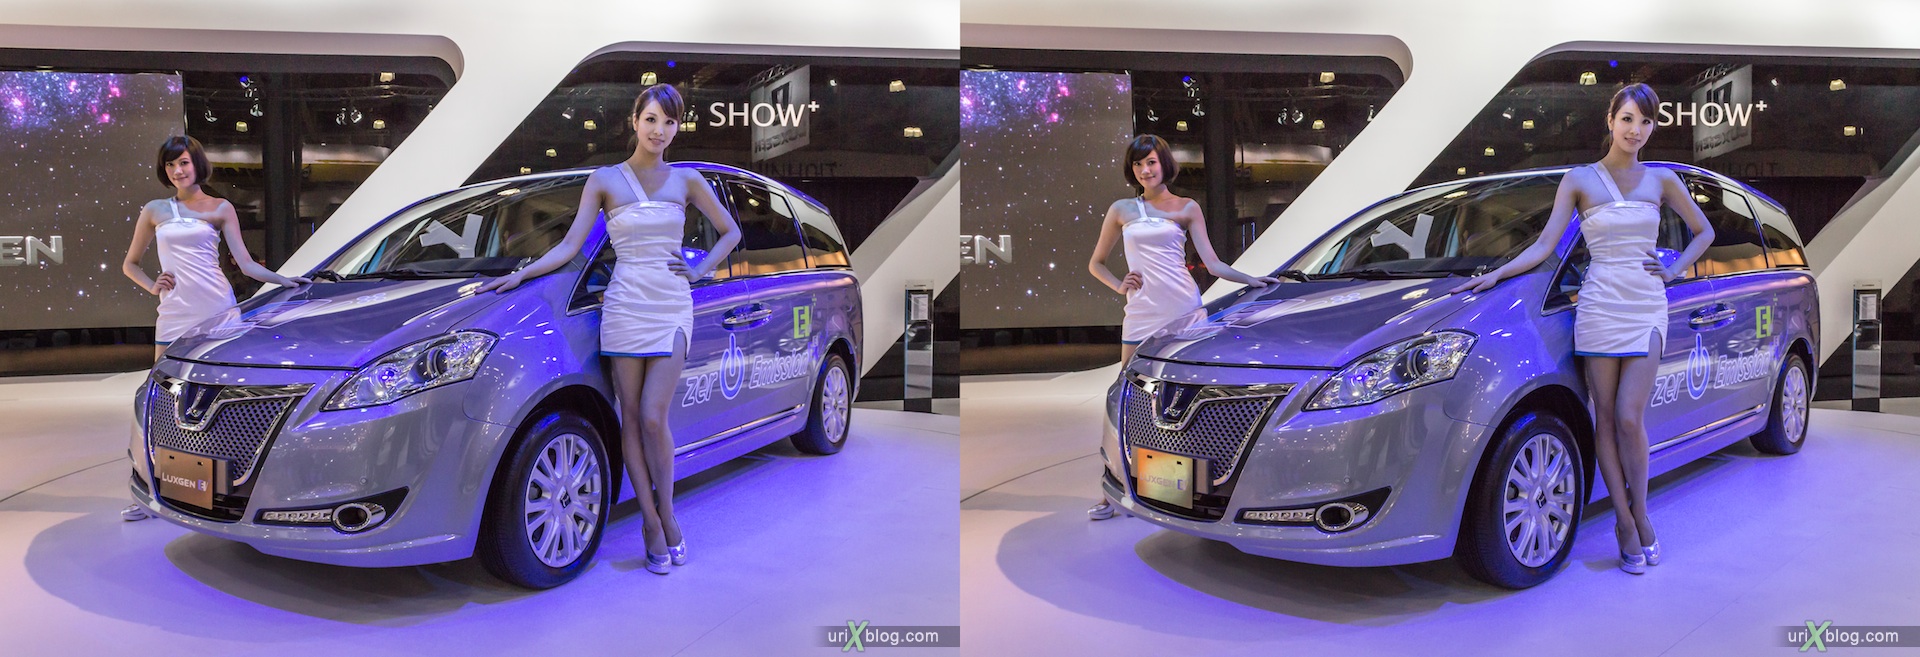 2012, Luxgen E, girl, model, Moscow International Automobile Salon, auto show, 3D, stereo pair, cross-eyed, crossview